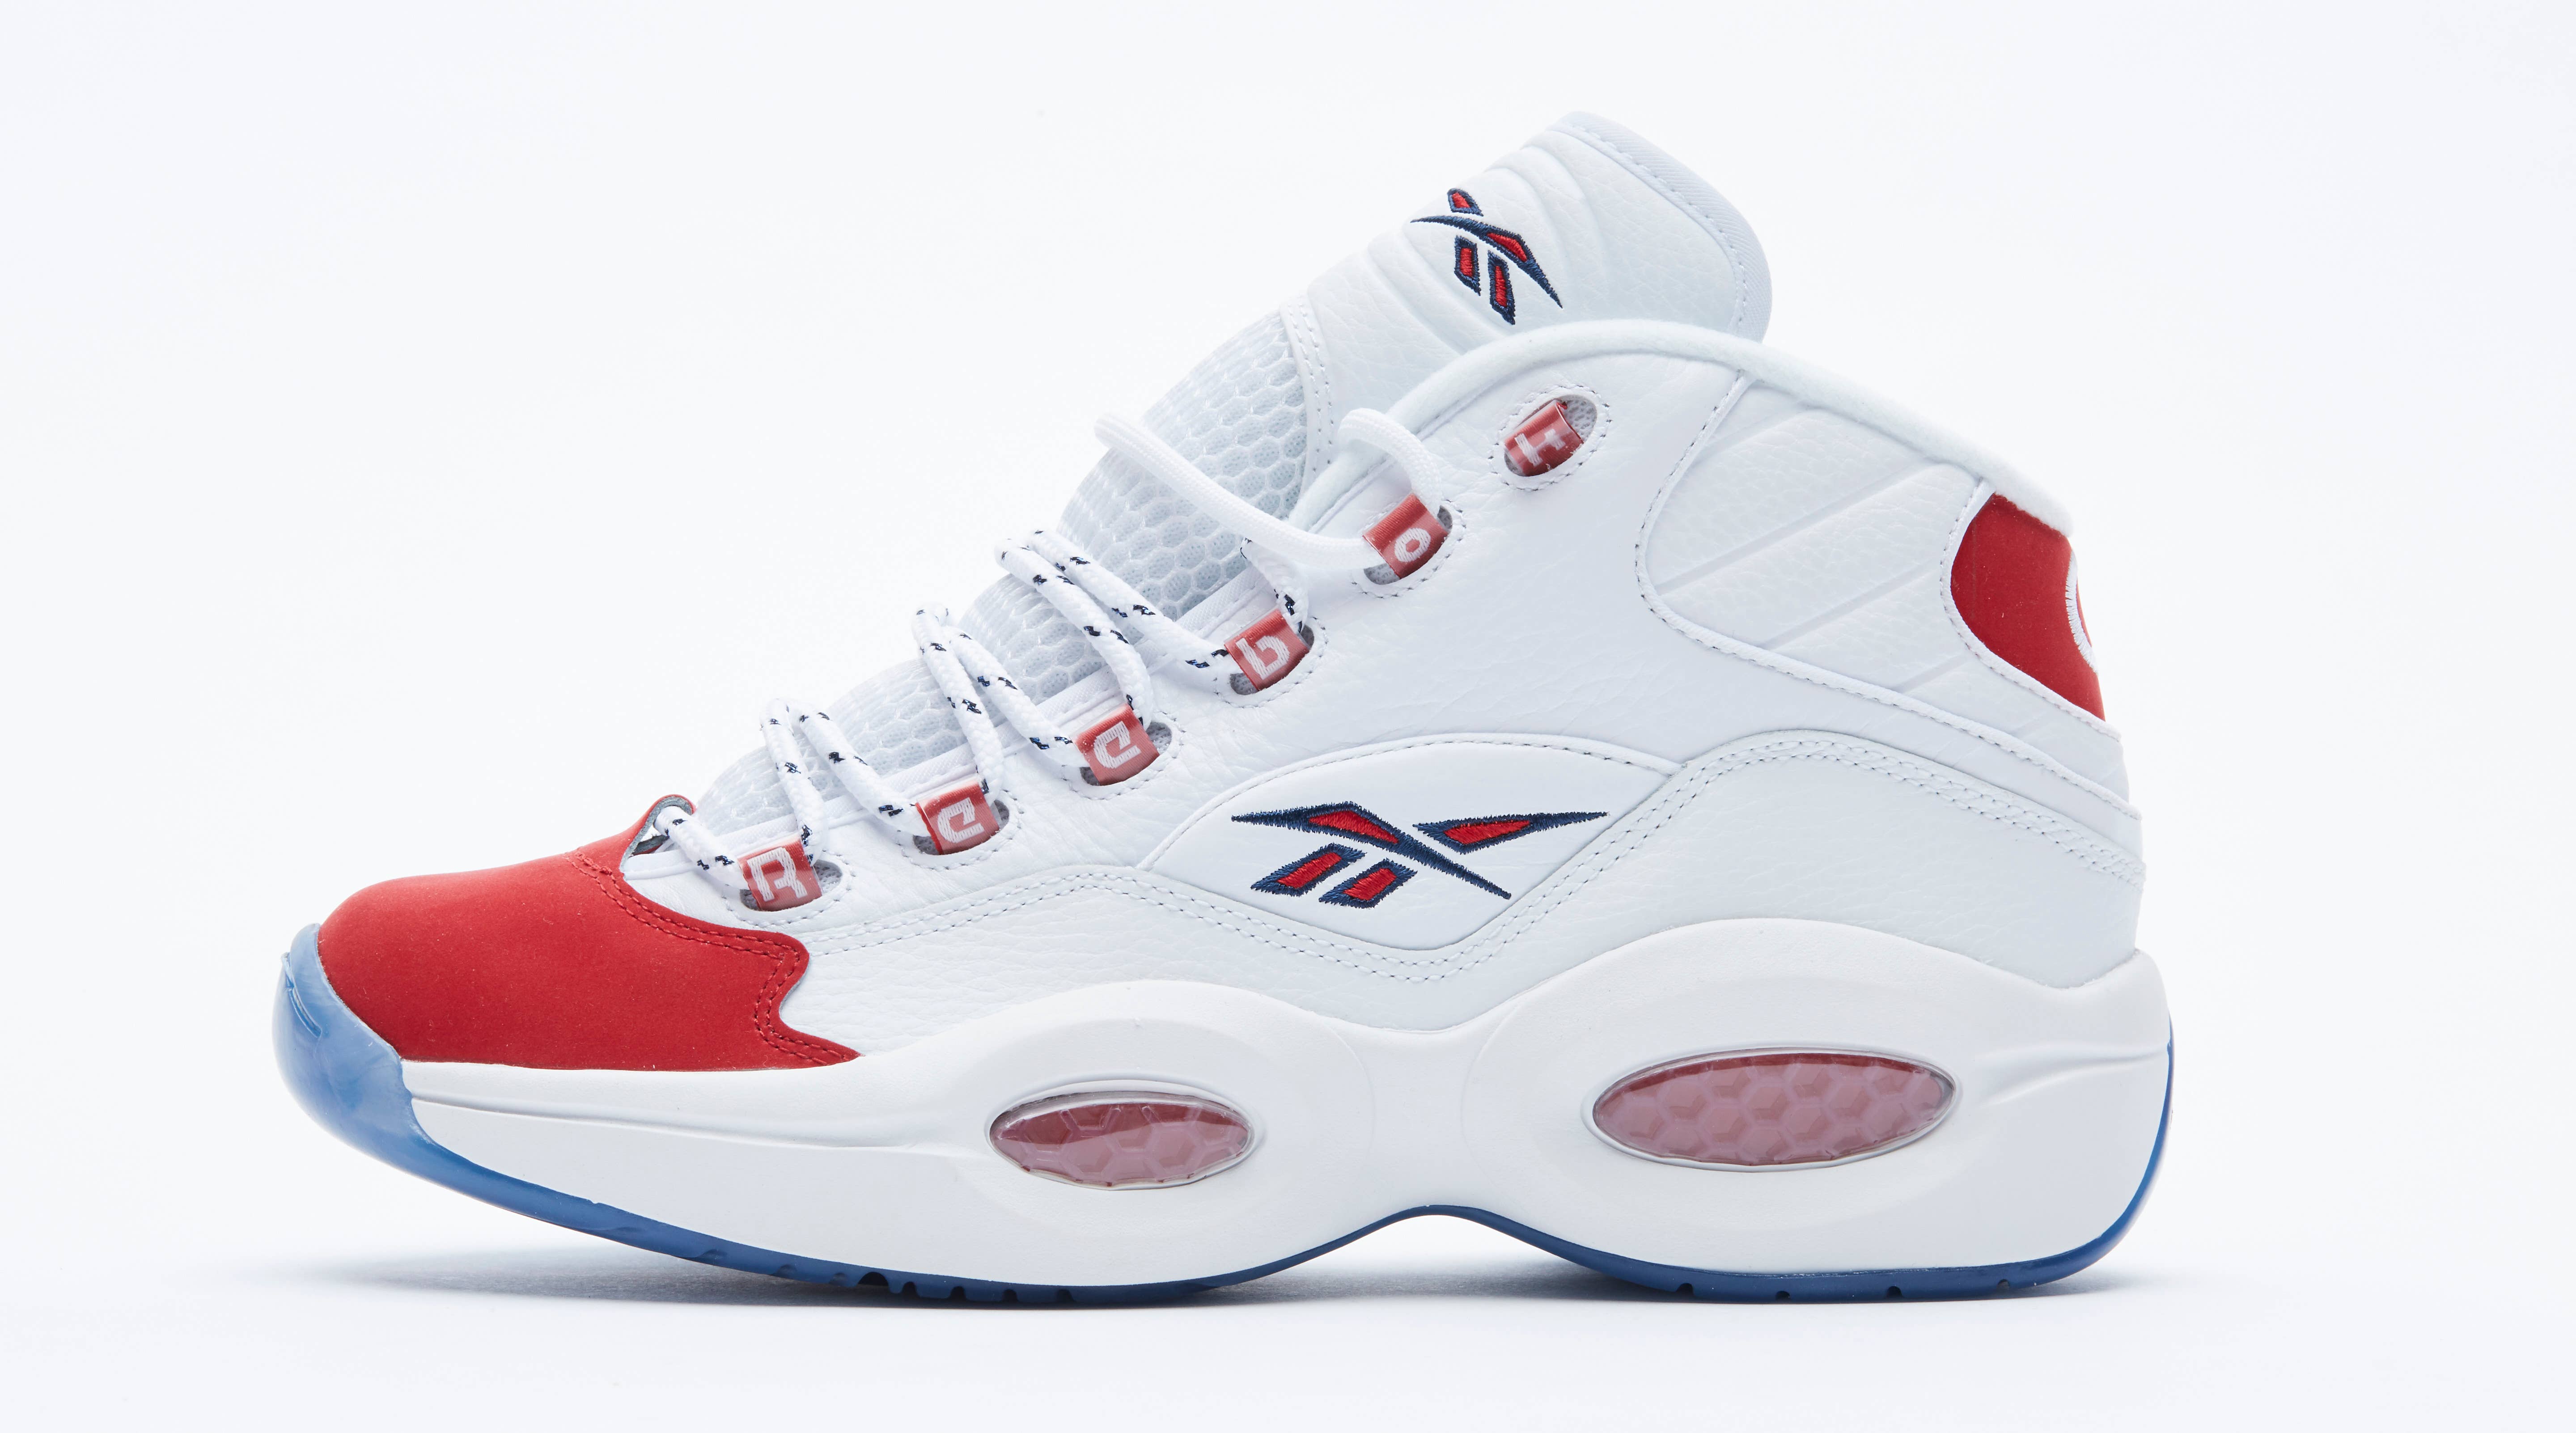 Reebok Question Mid OG Suede 'Red Toe' 2020 Lateral